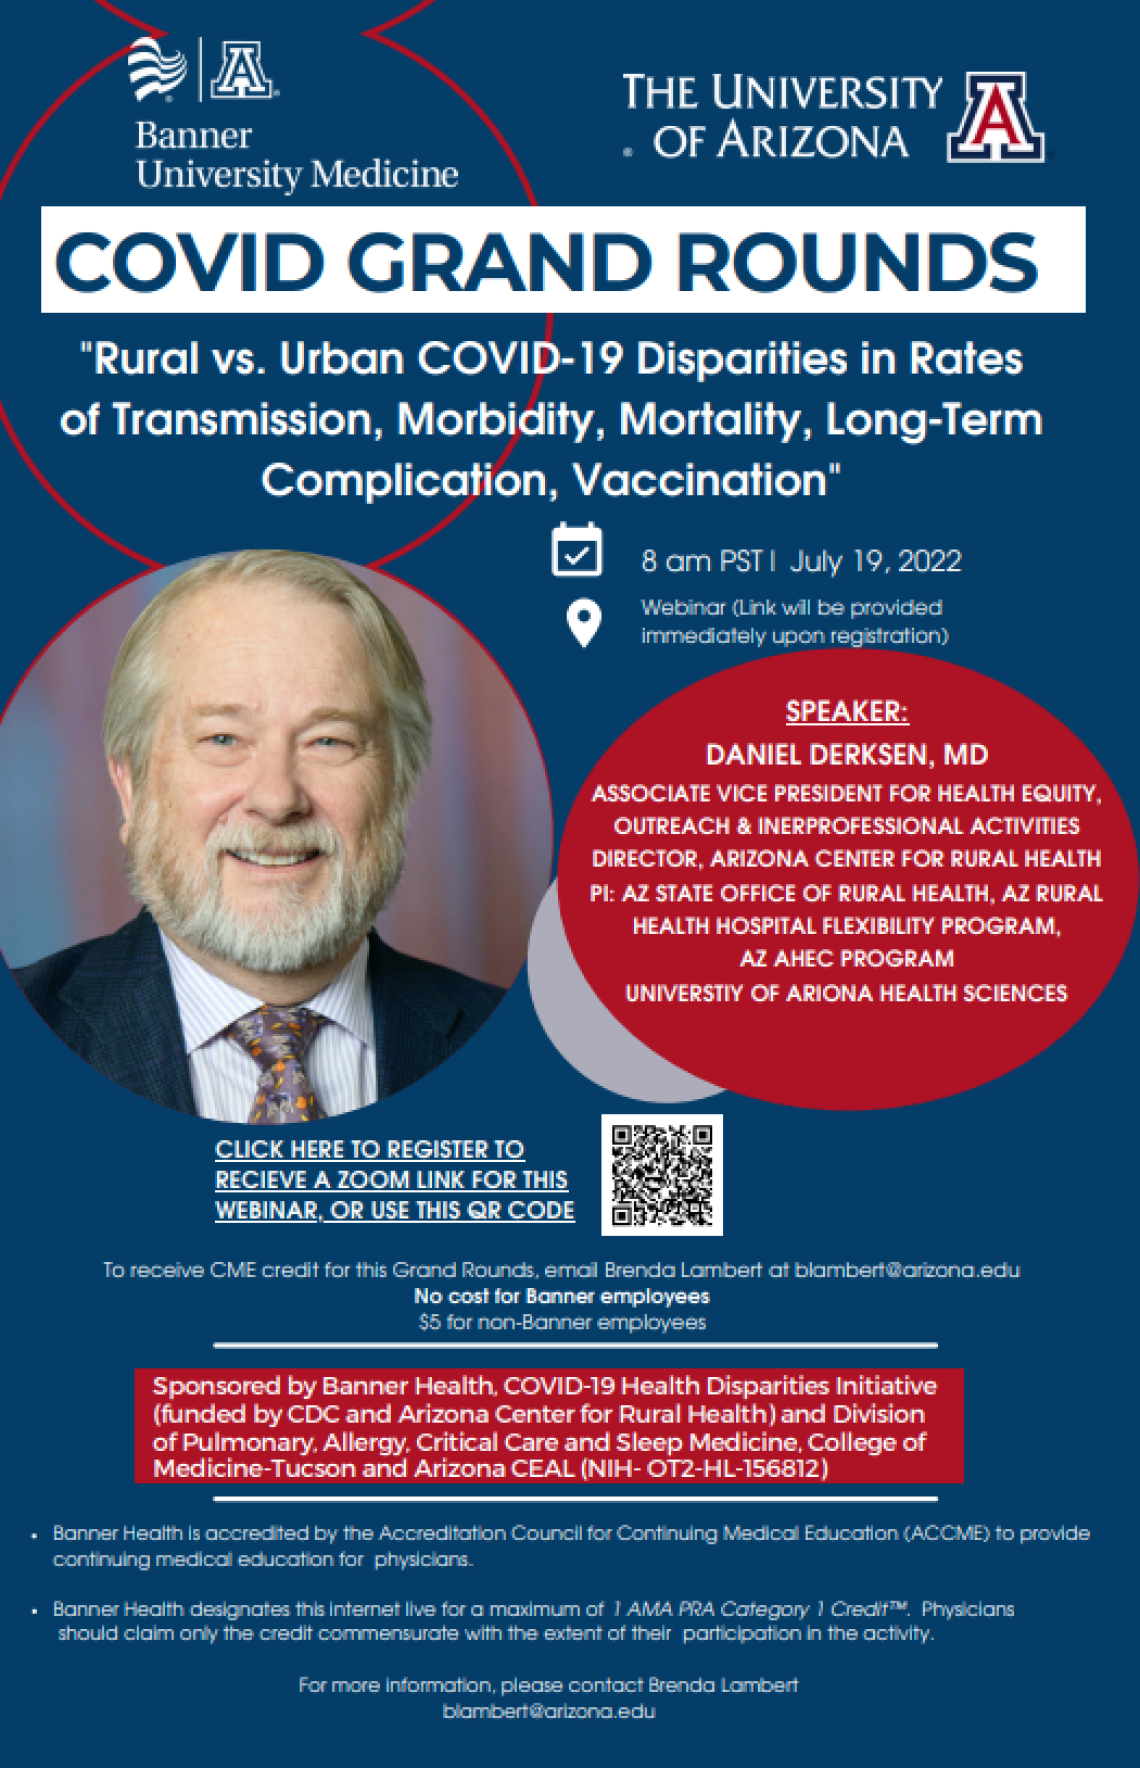 Covid Grand Rounds July 19 flyer